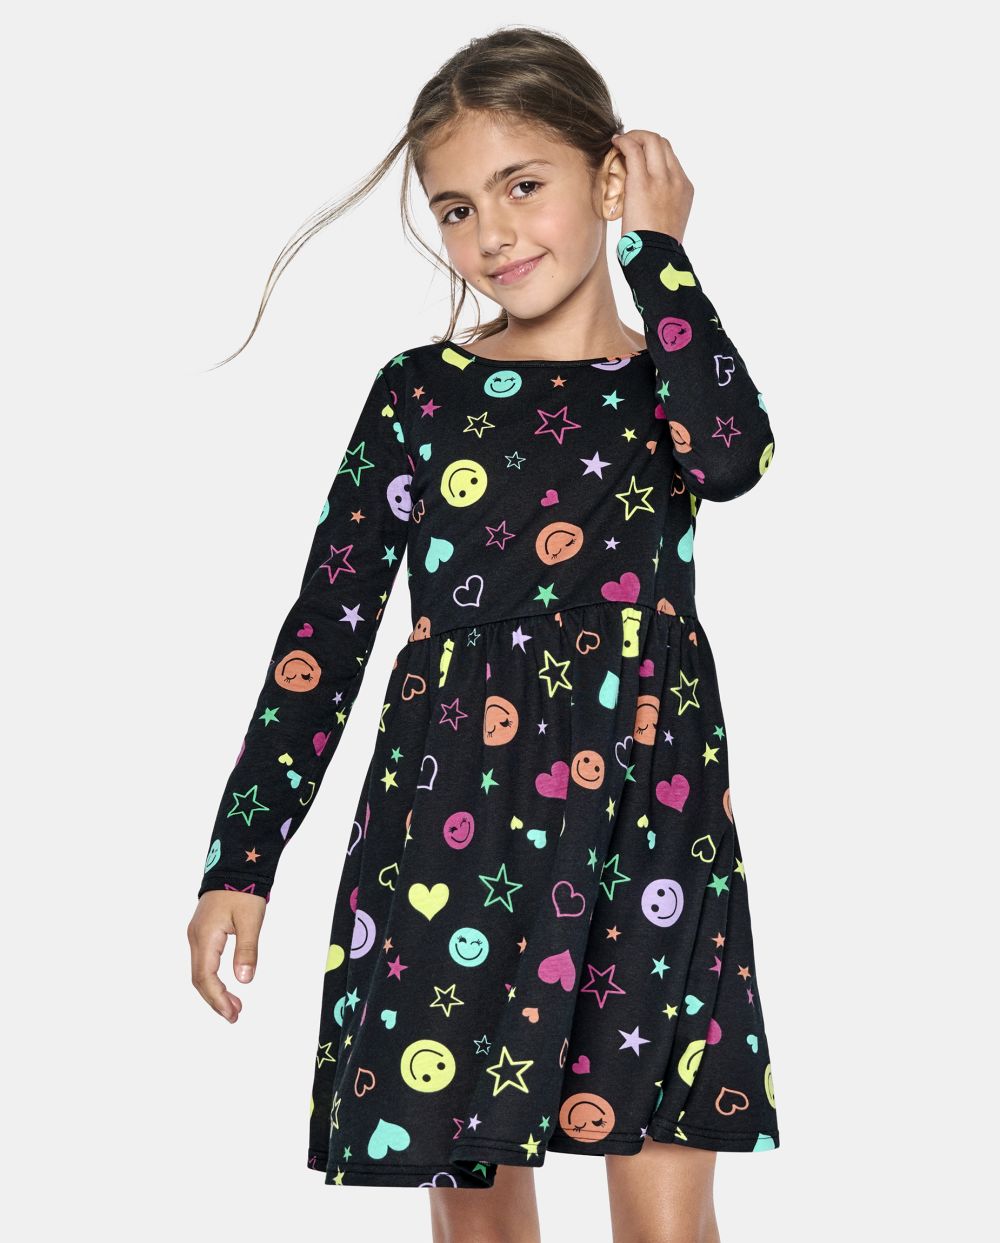 Girls Long Sleeves Above the Knee Crew Neck General Print Dress